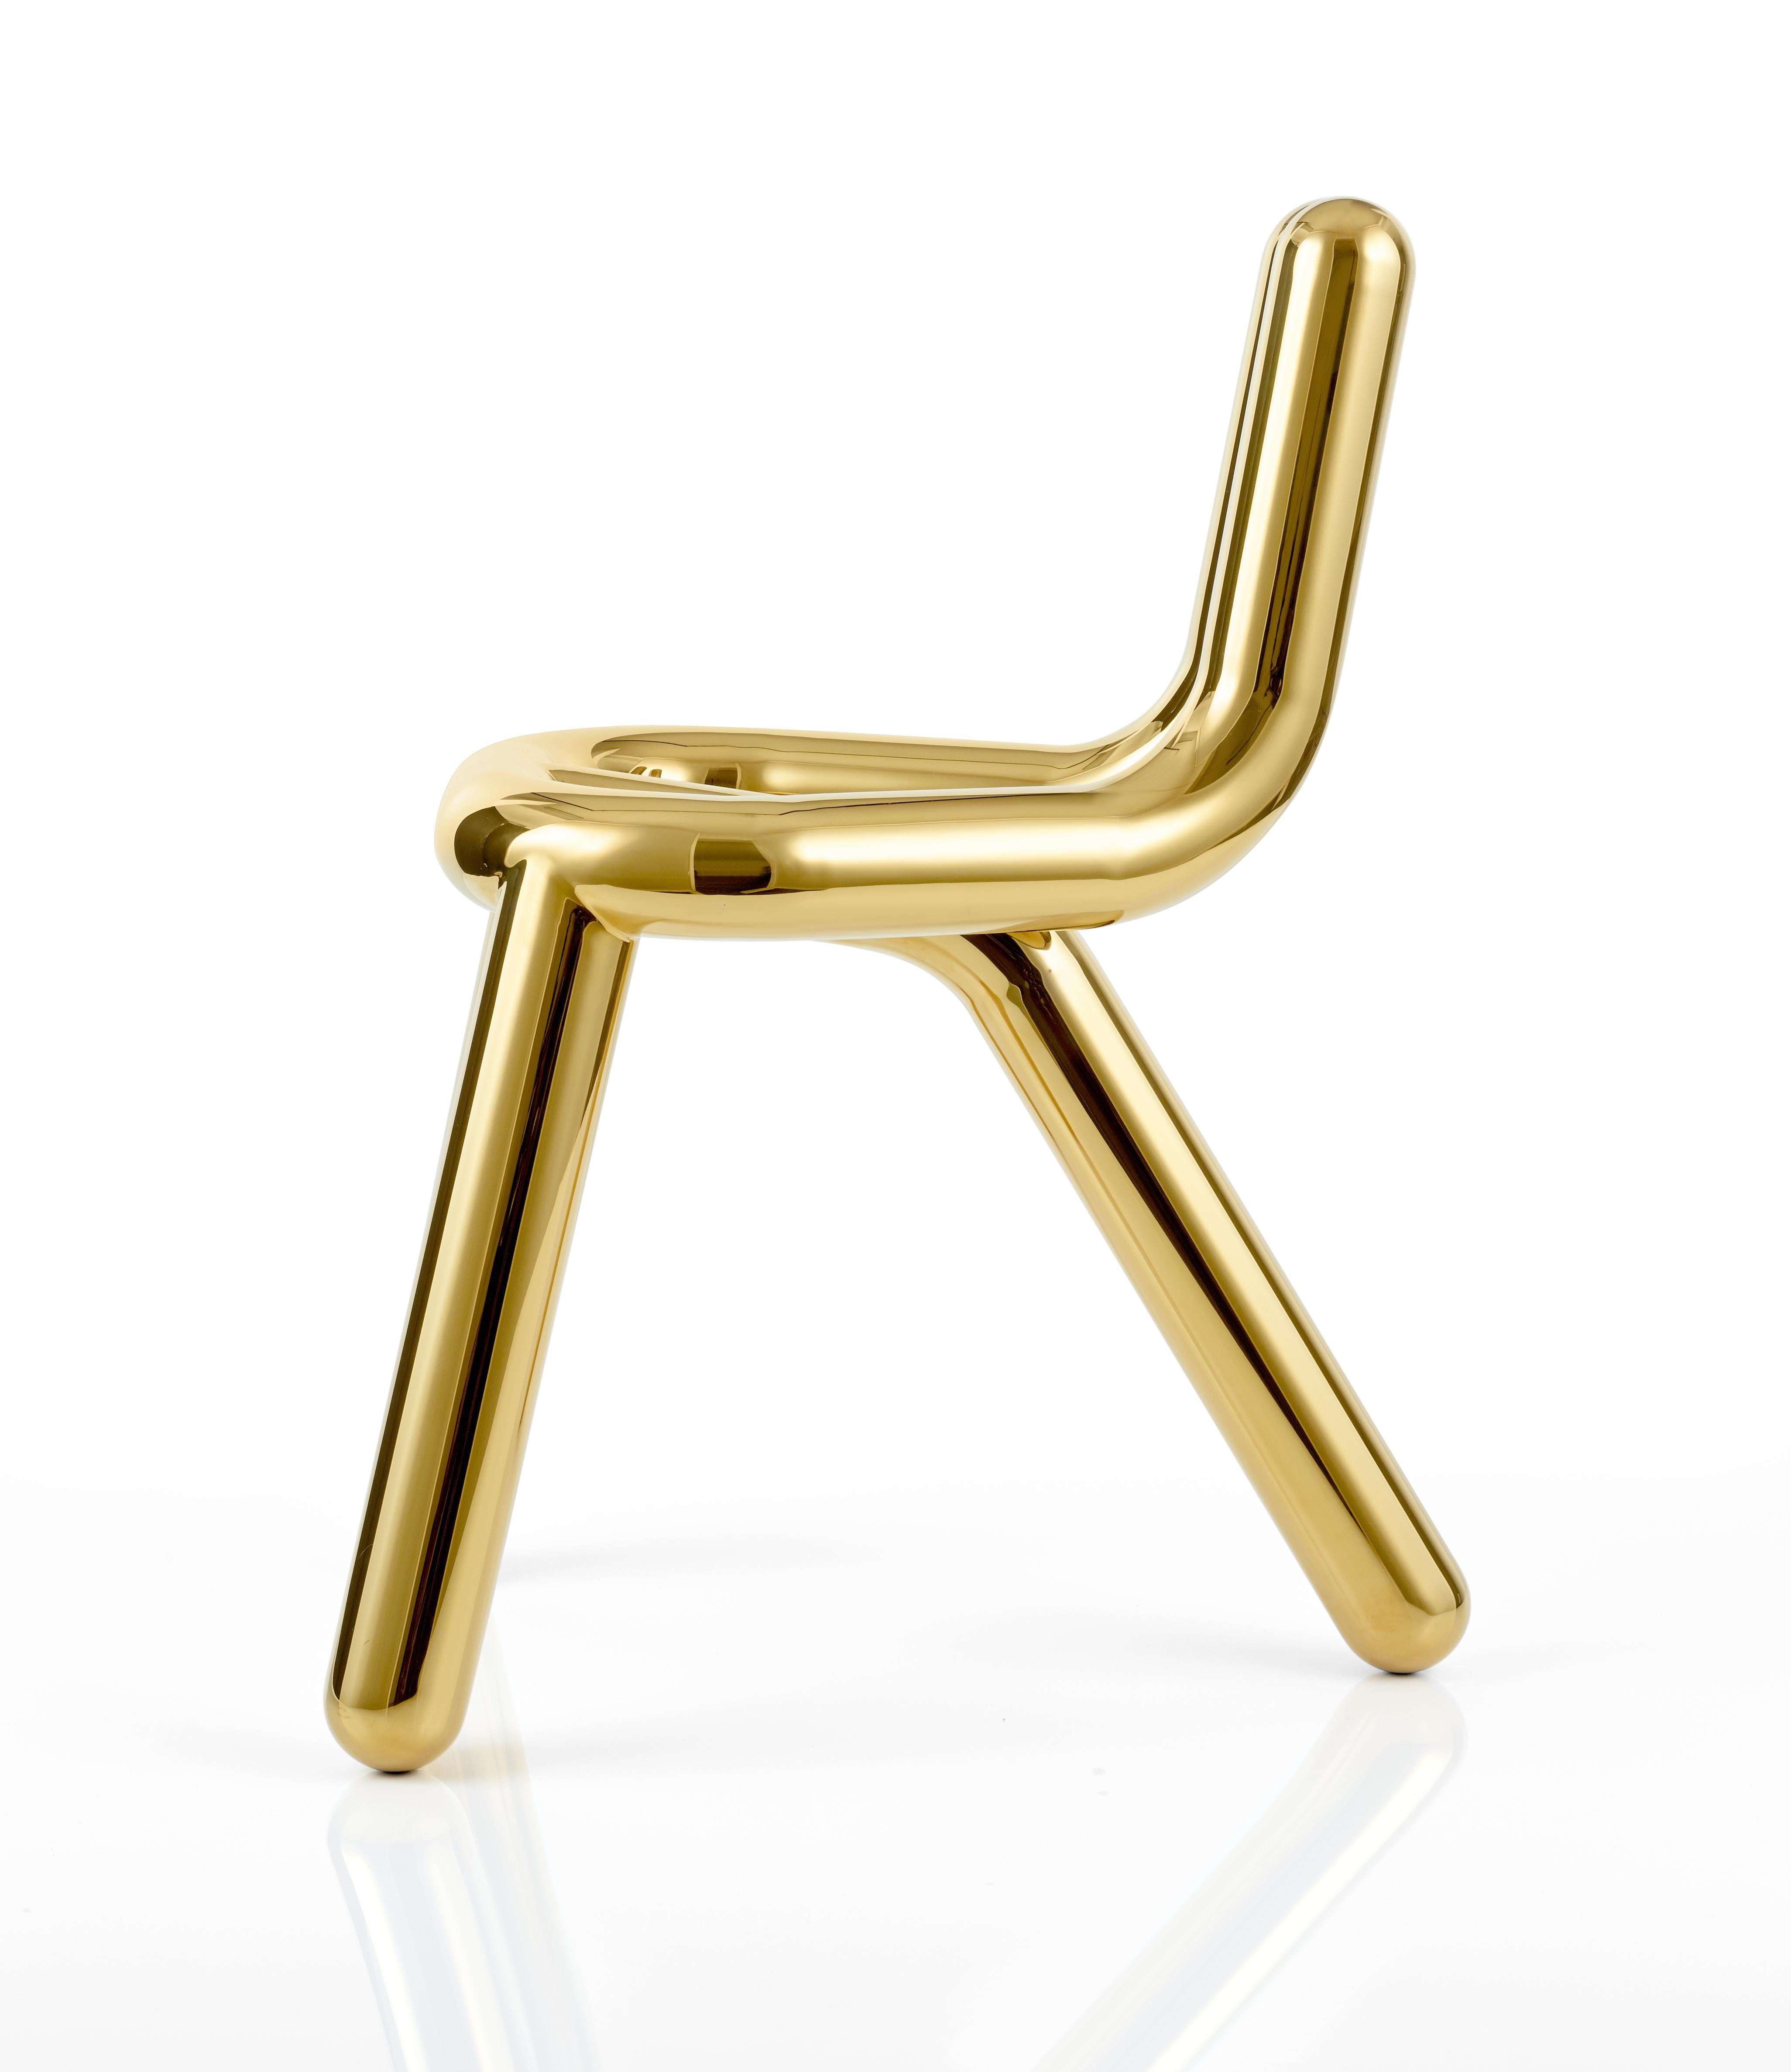 Line is entirely made of stainless steel. The strong presence of her, simultaneously elegant and daring curves makes this chair a recognizable luxury icon. The chair became a sculpture, in an amazingly bright stainless steel or with titanium coating